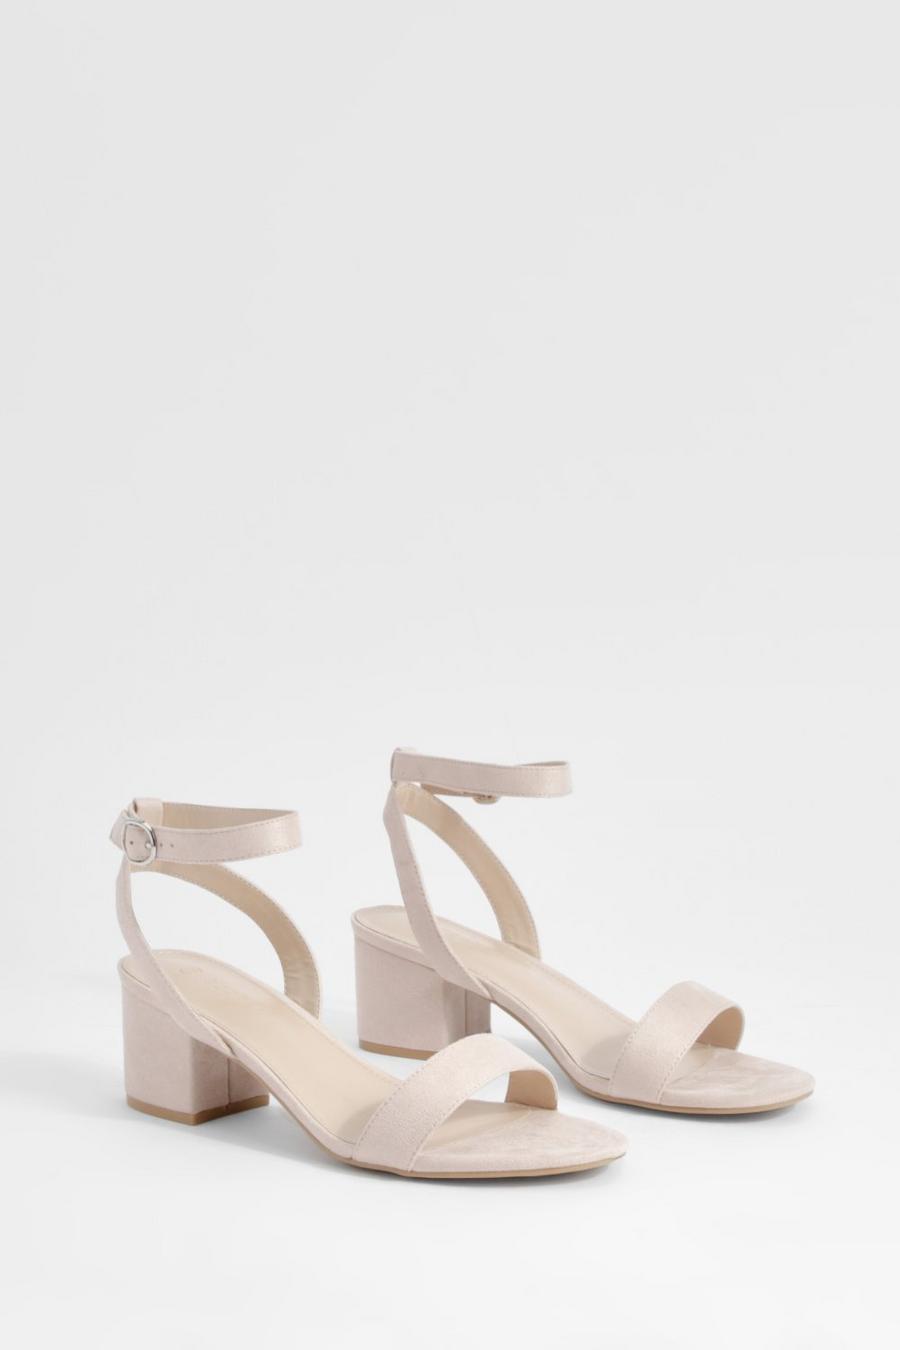 Blush Wide Width Low Block Barely There Heels